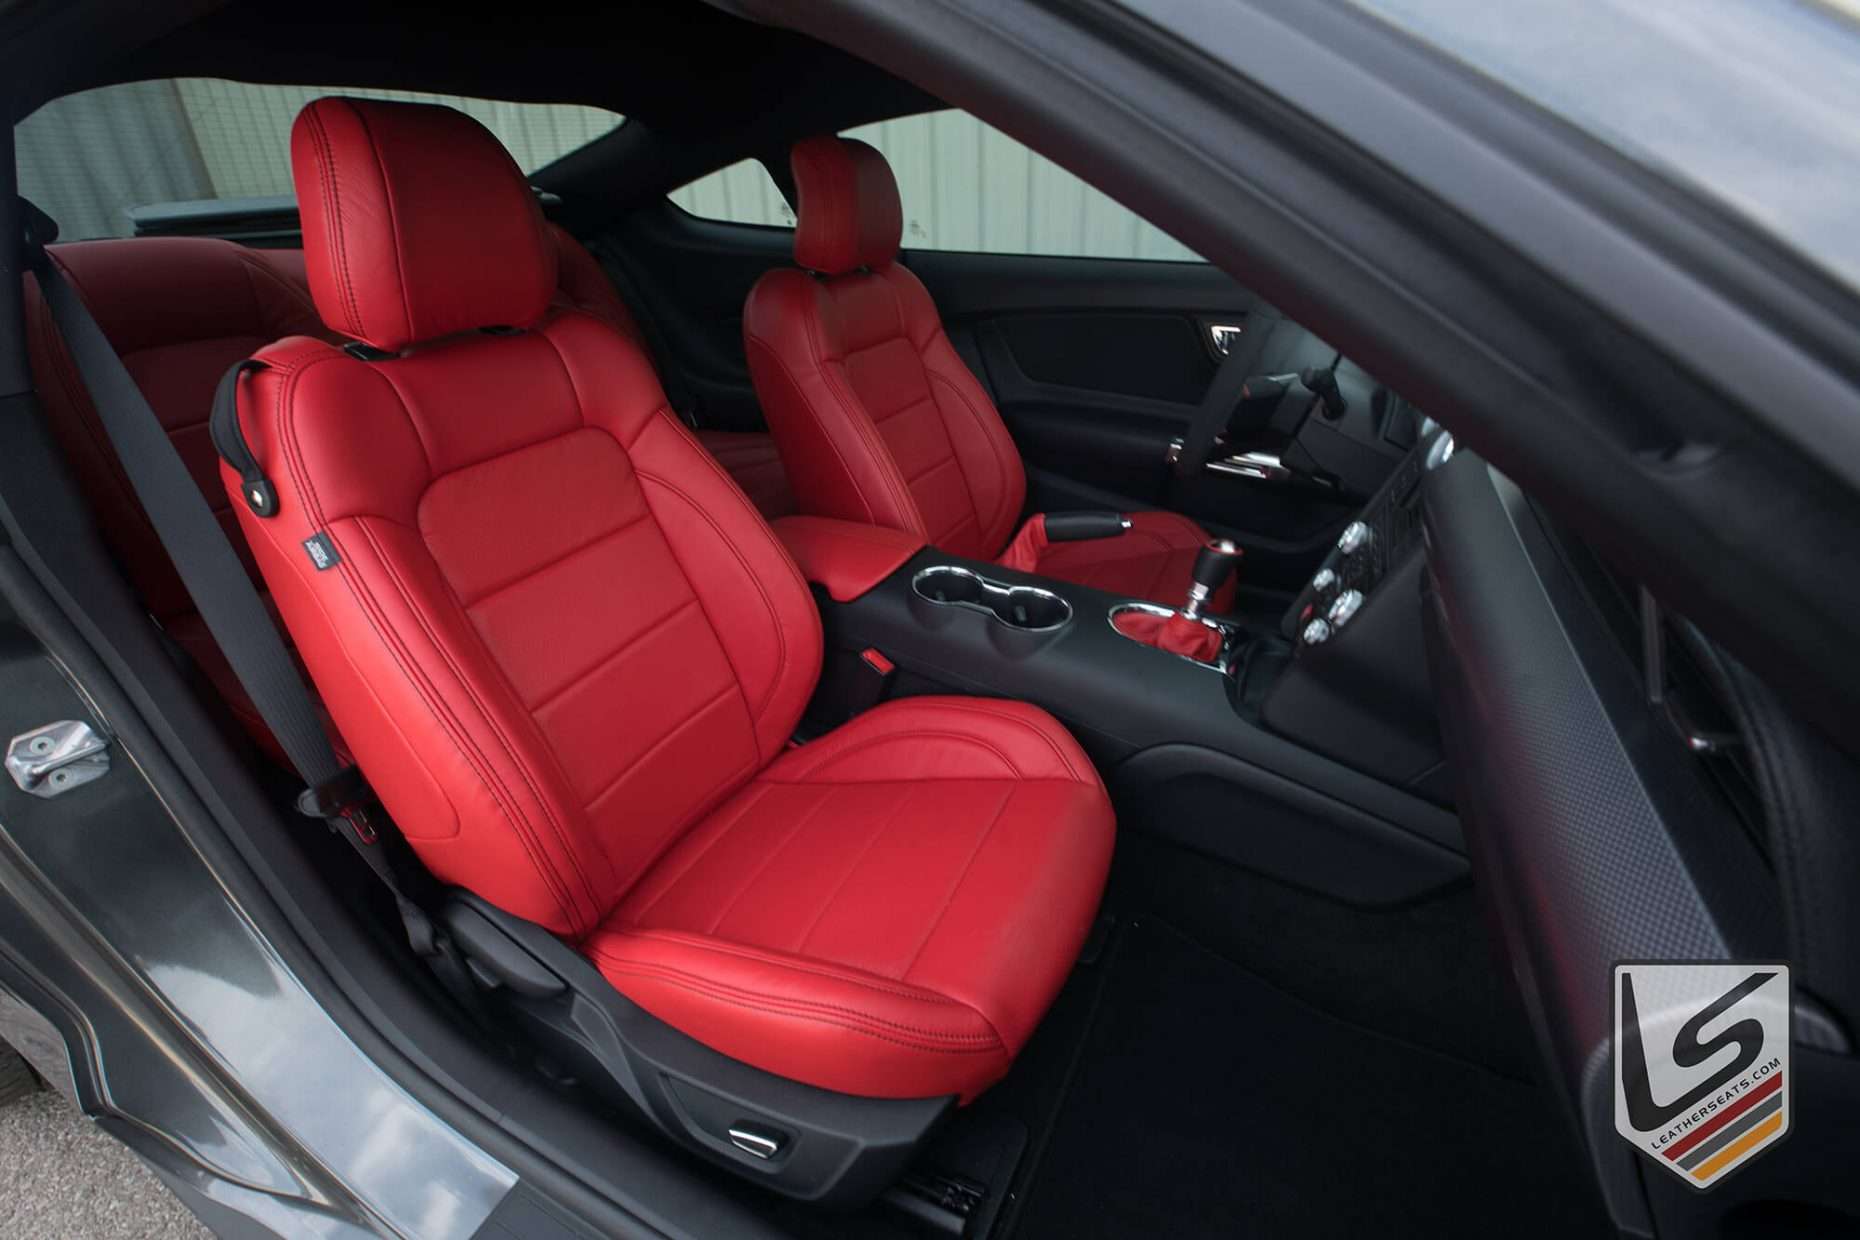 Alternative view of bright red leather seats